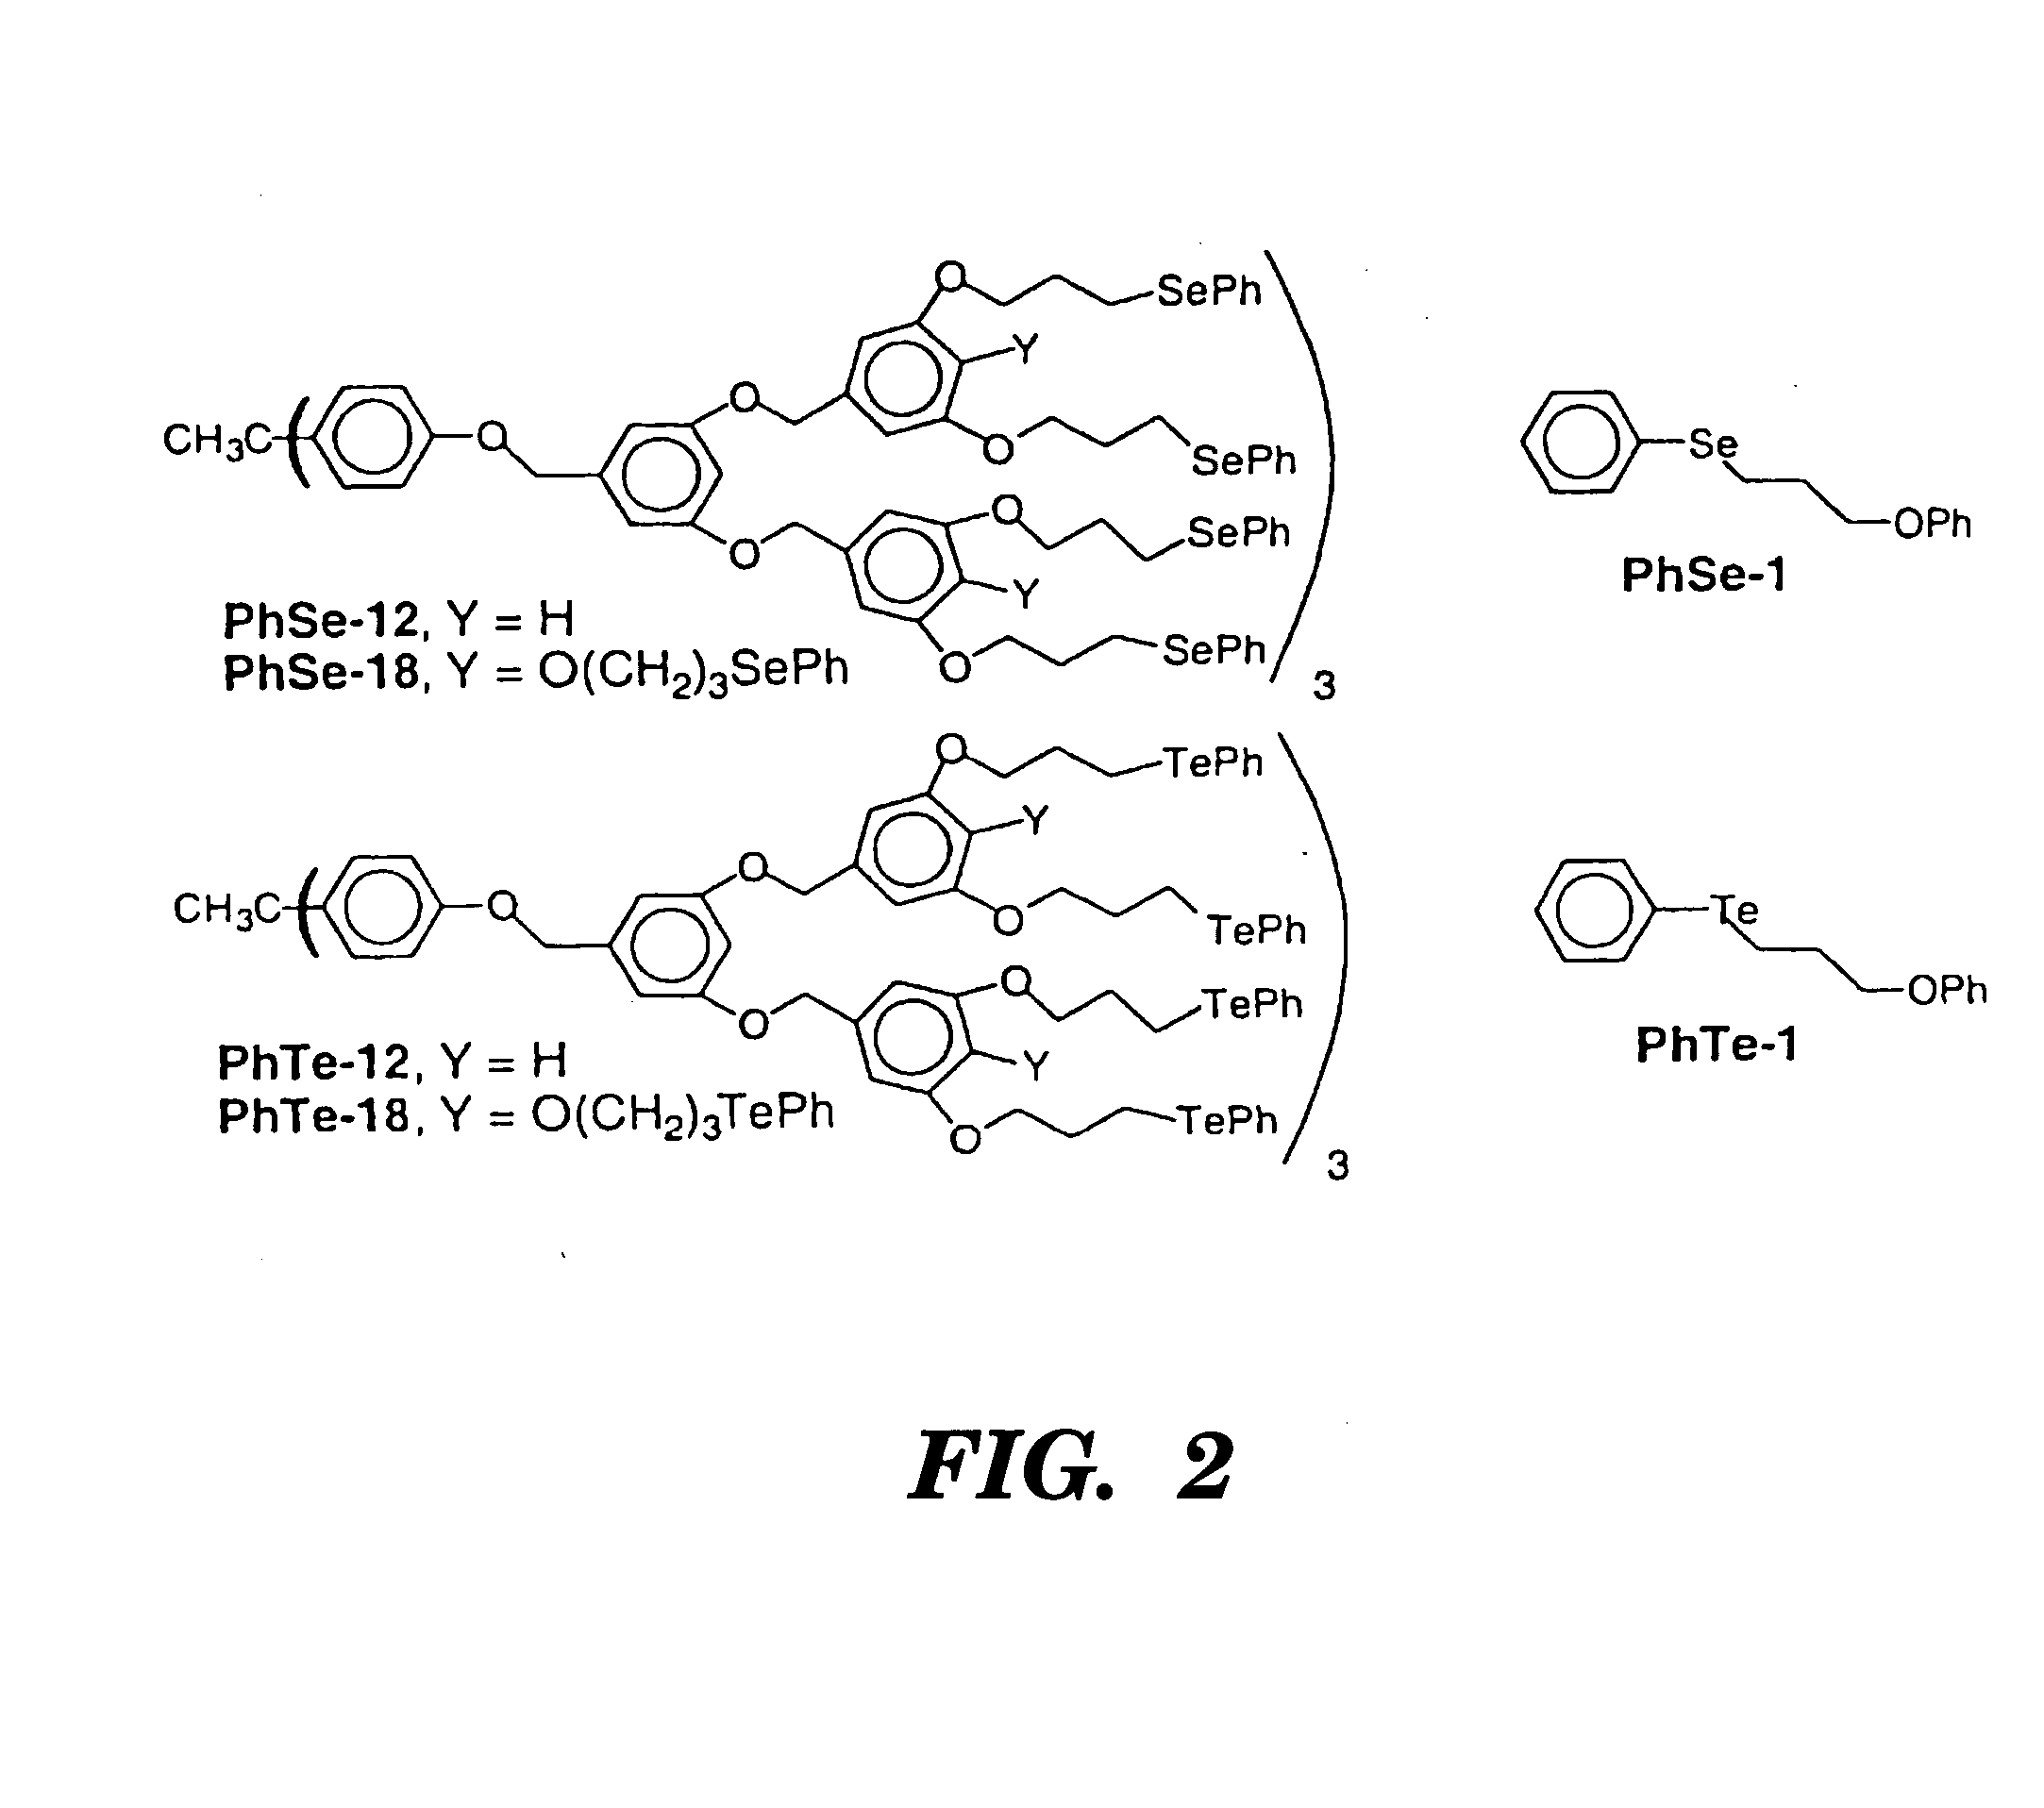 Hybrid anti-fouling coating compositions and methods for preventing the fouling of surfaces subjected to a marine environment